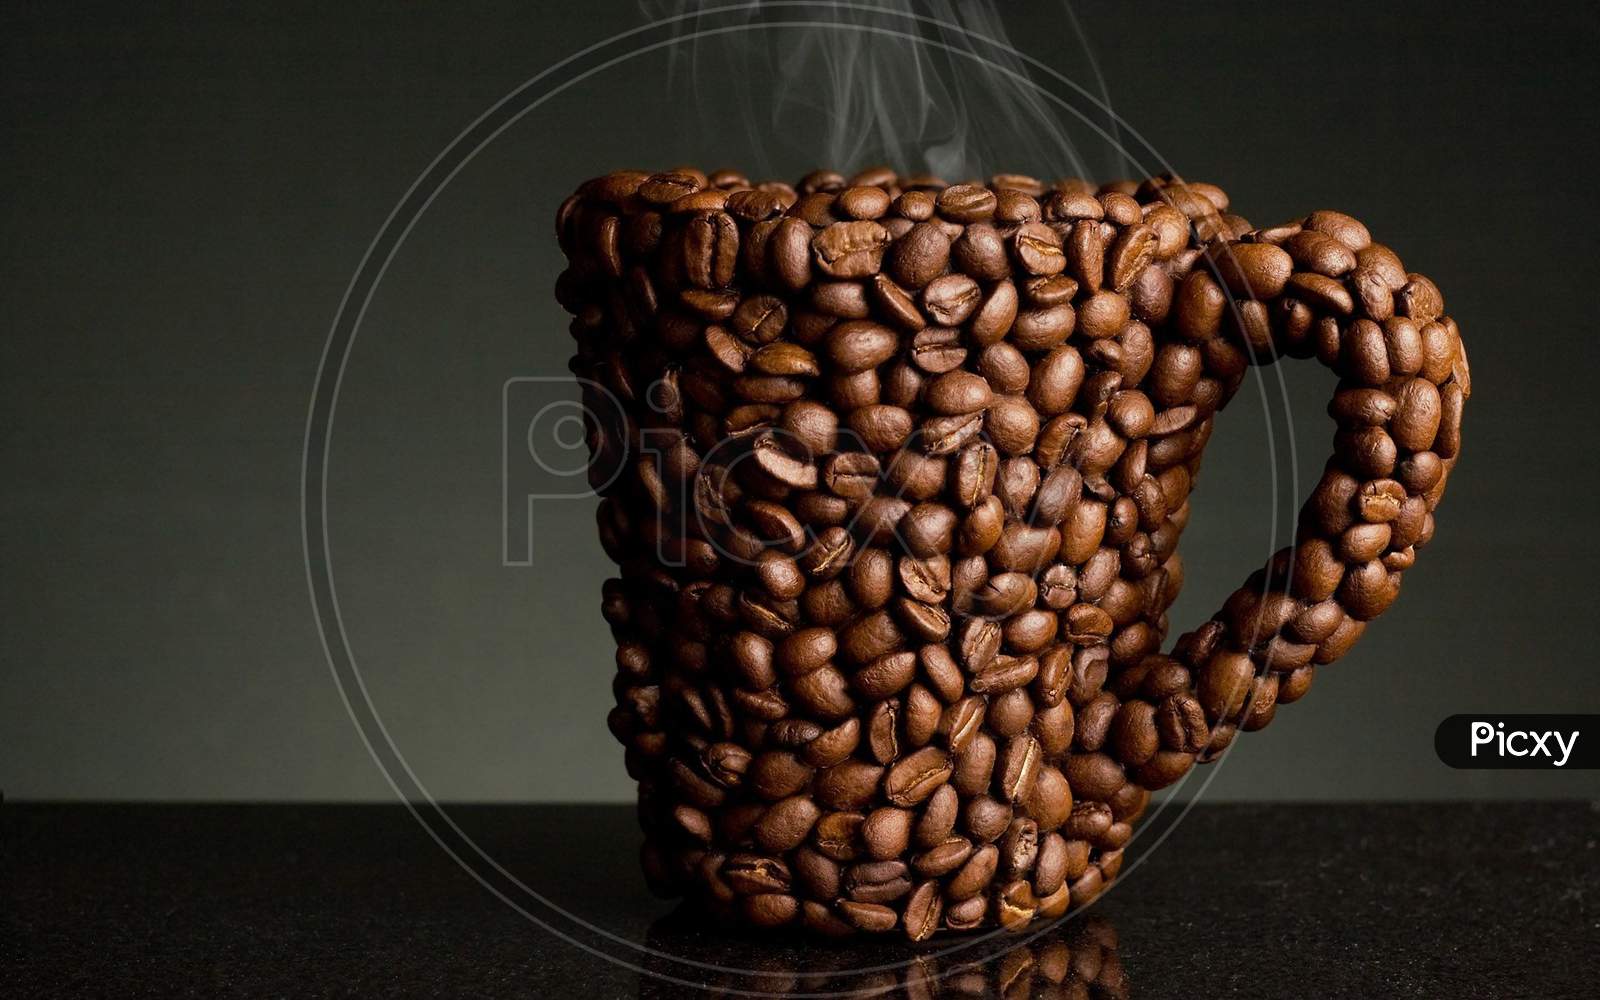 Coffee mug made up of Coffee beans in black background